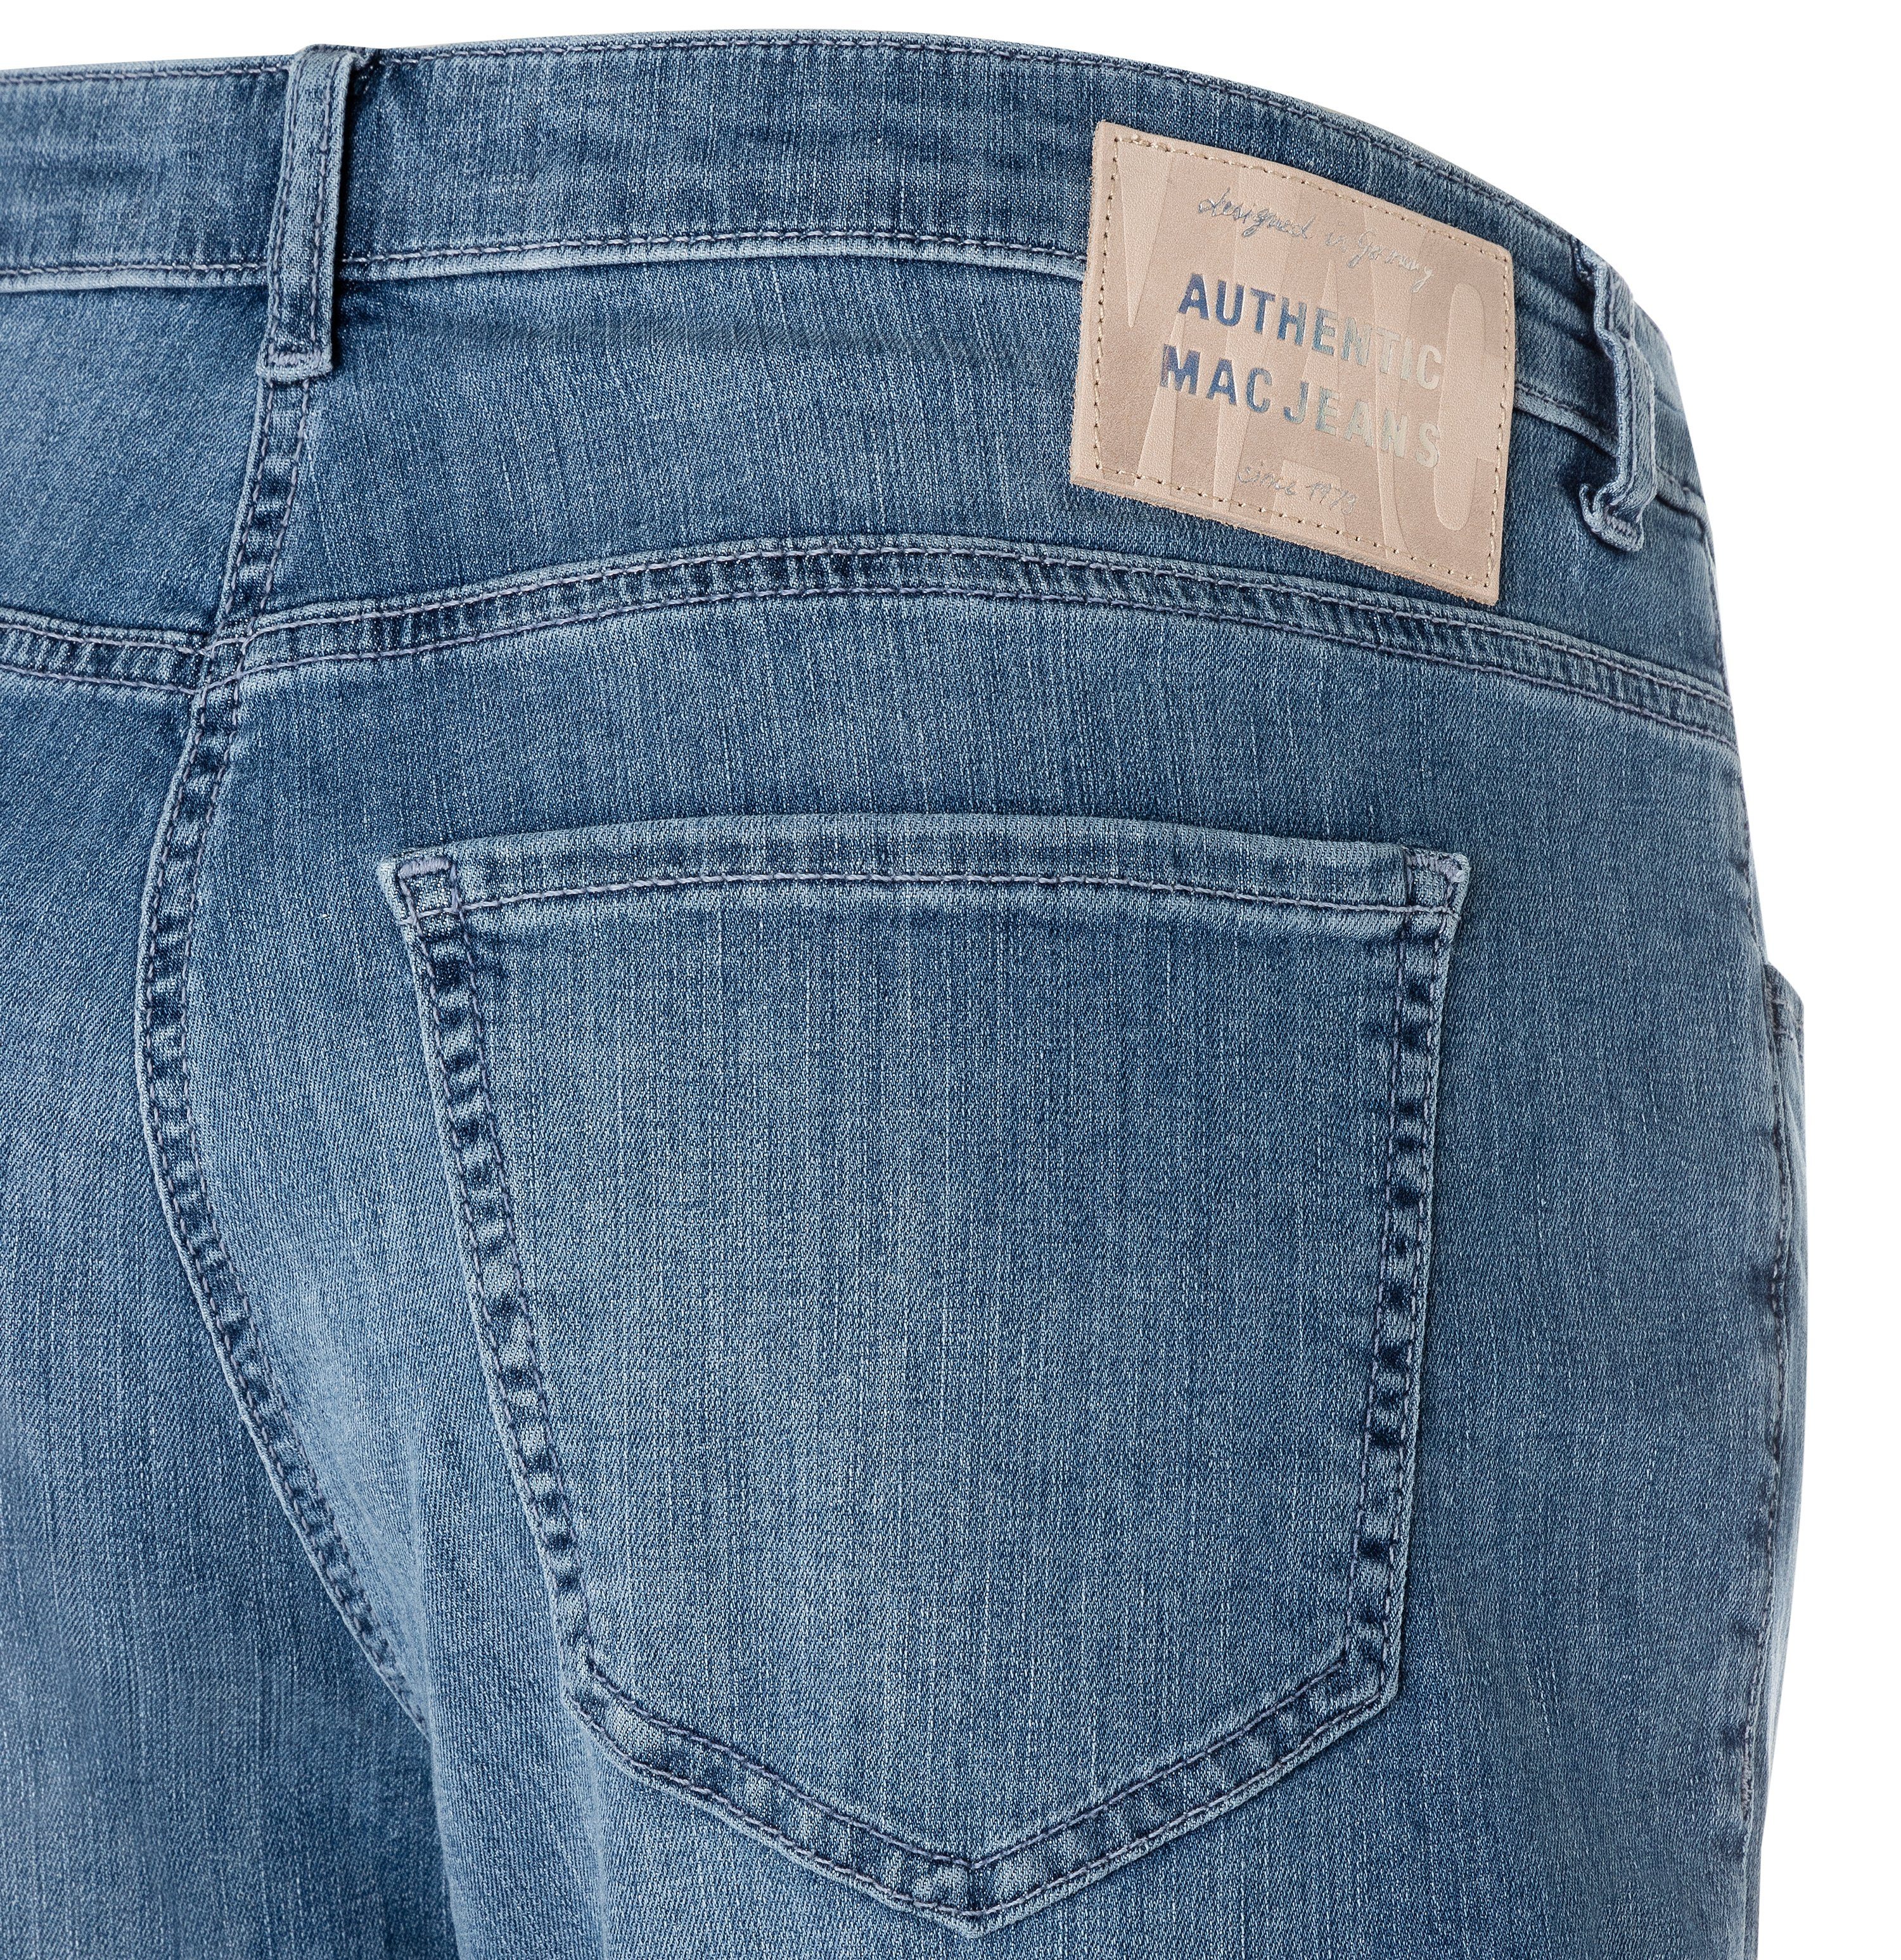 commercial MAC Slim-fit-Jeans Shorty summ